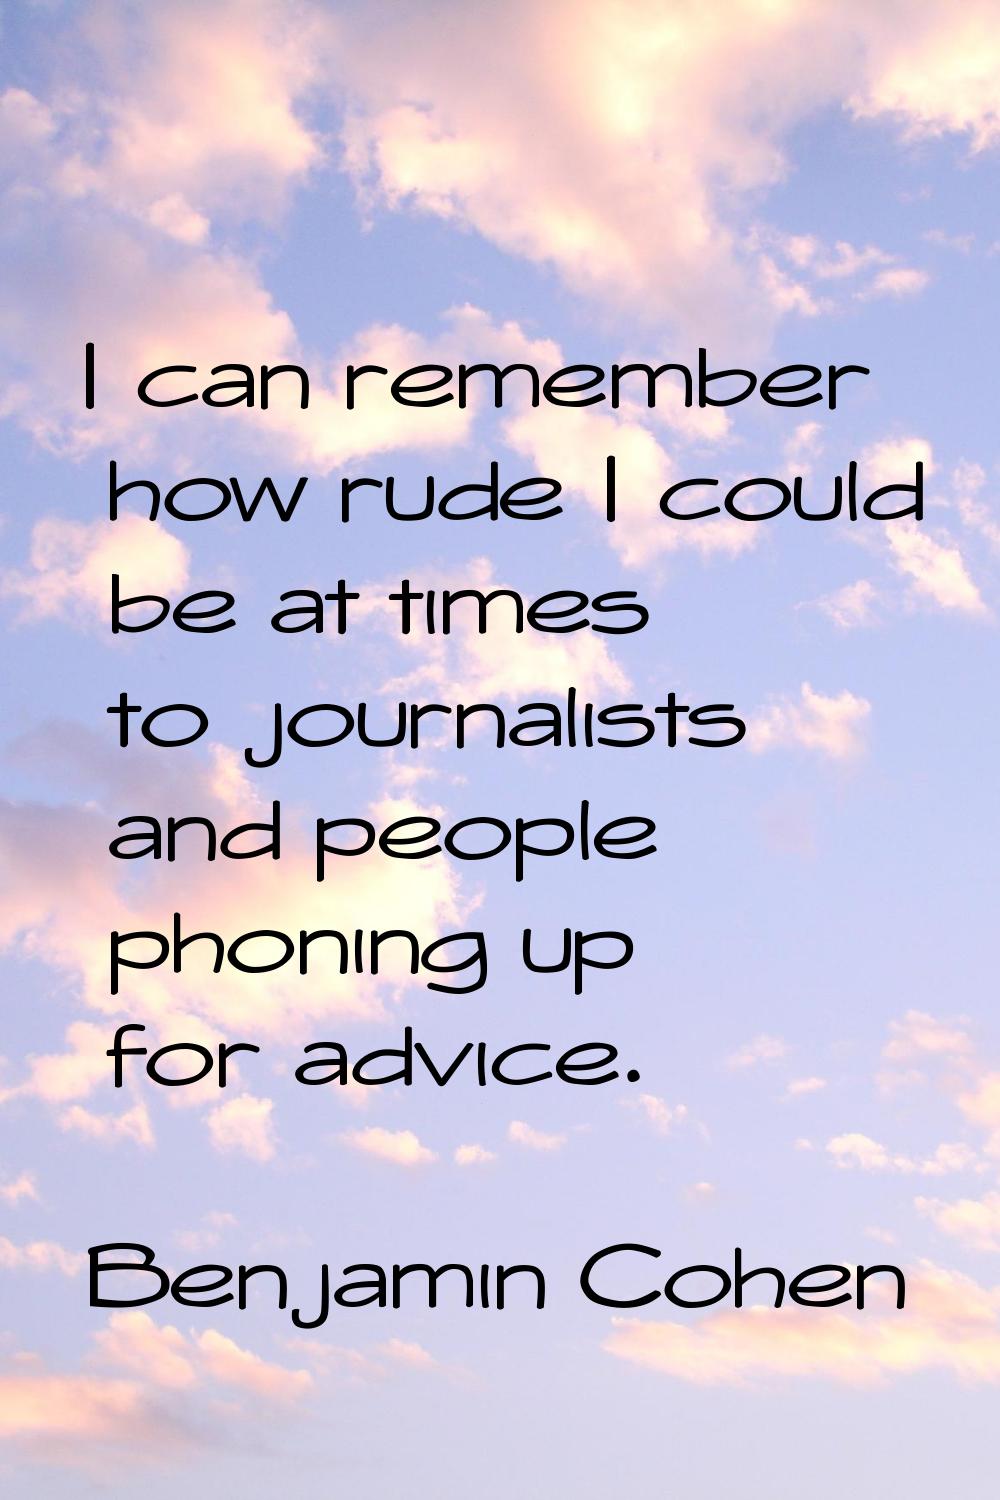 I can remember how rude I could be at times to journalists and people phoning up for advice.